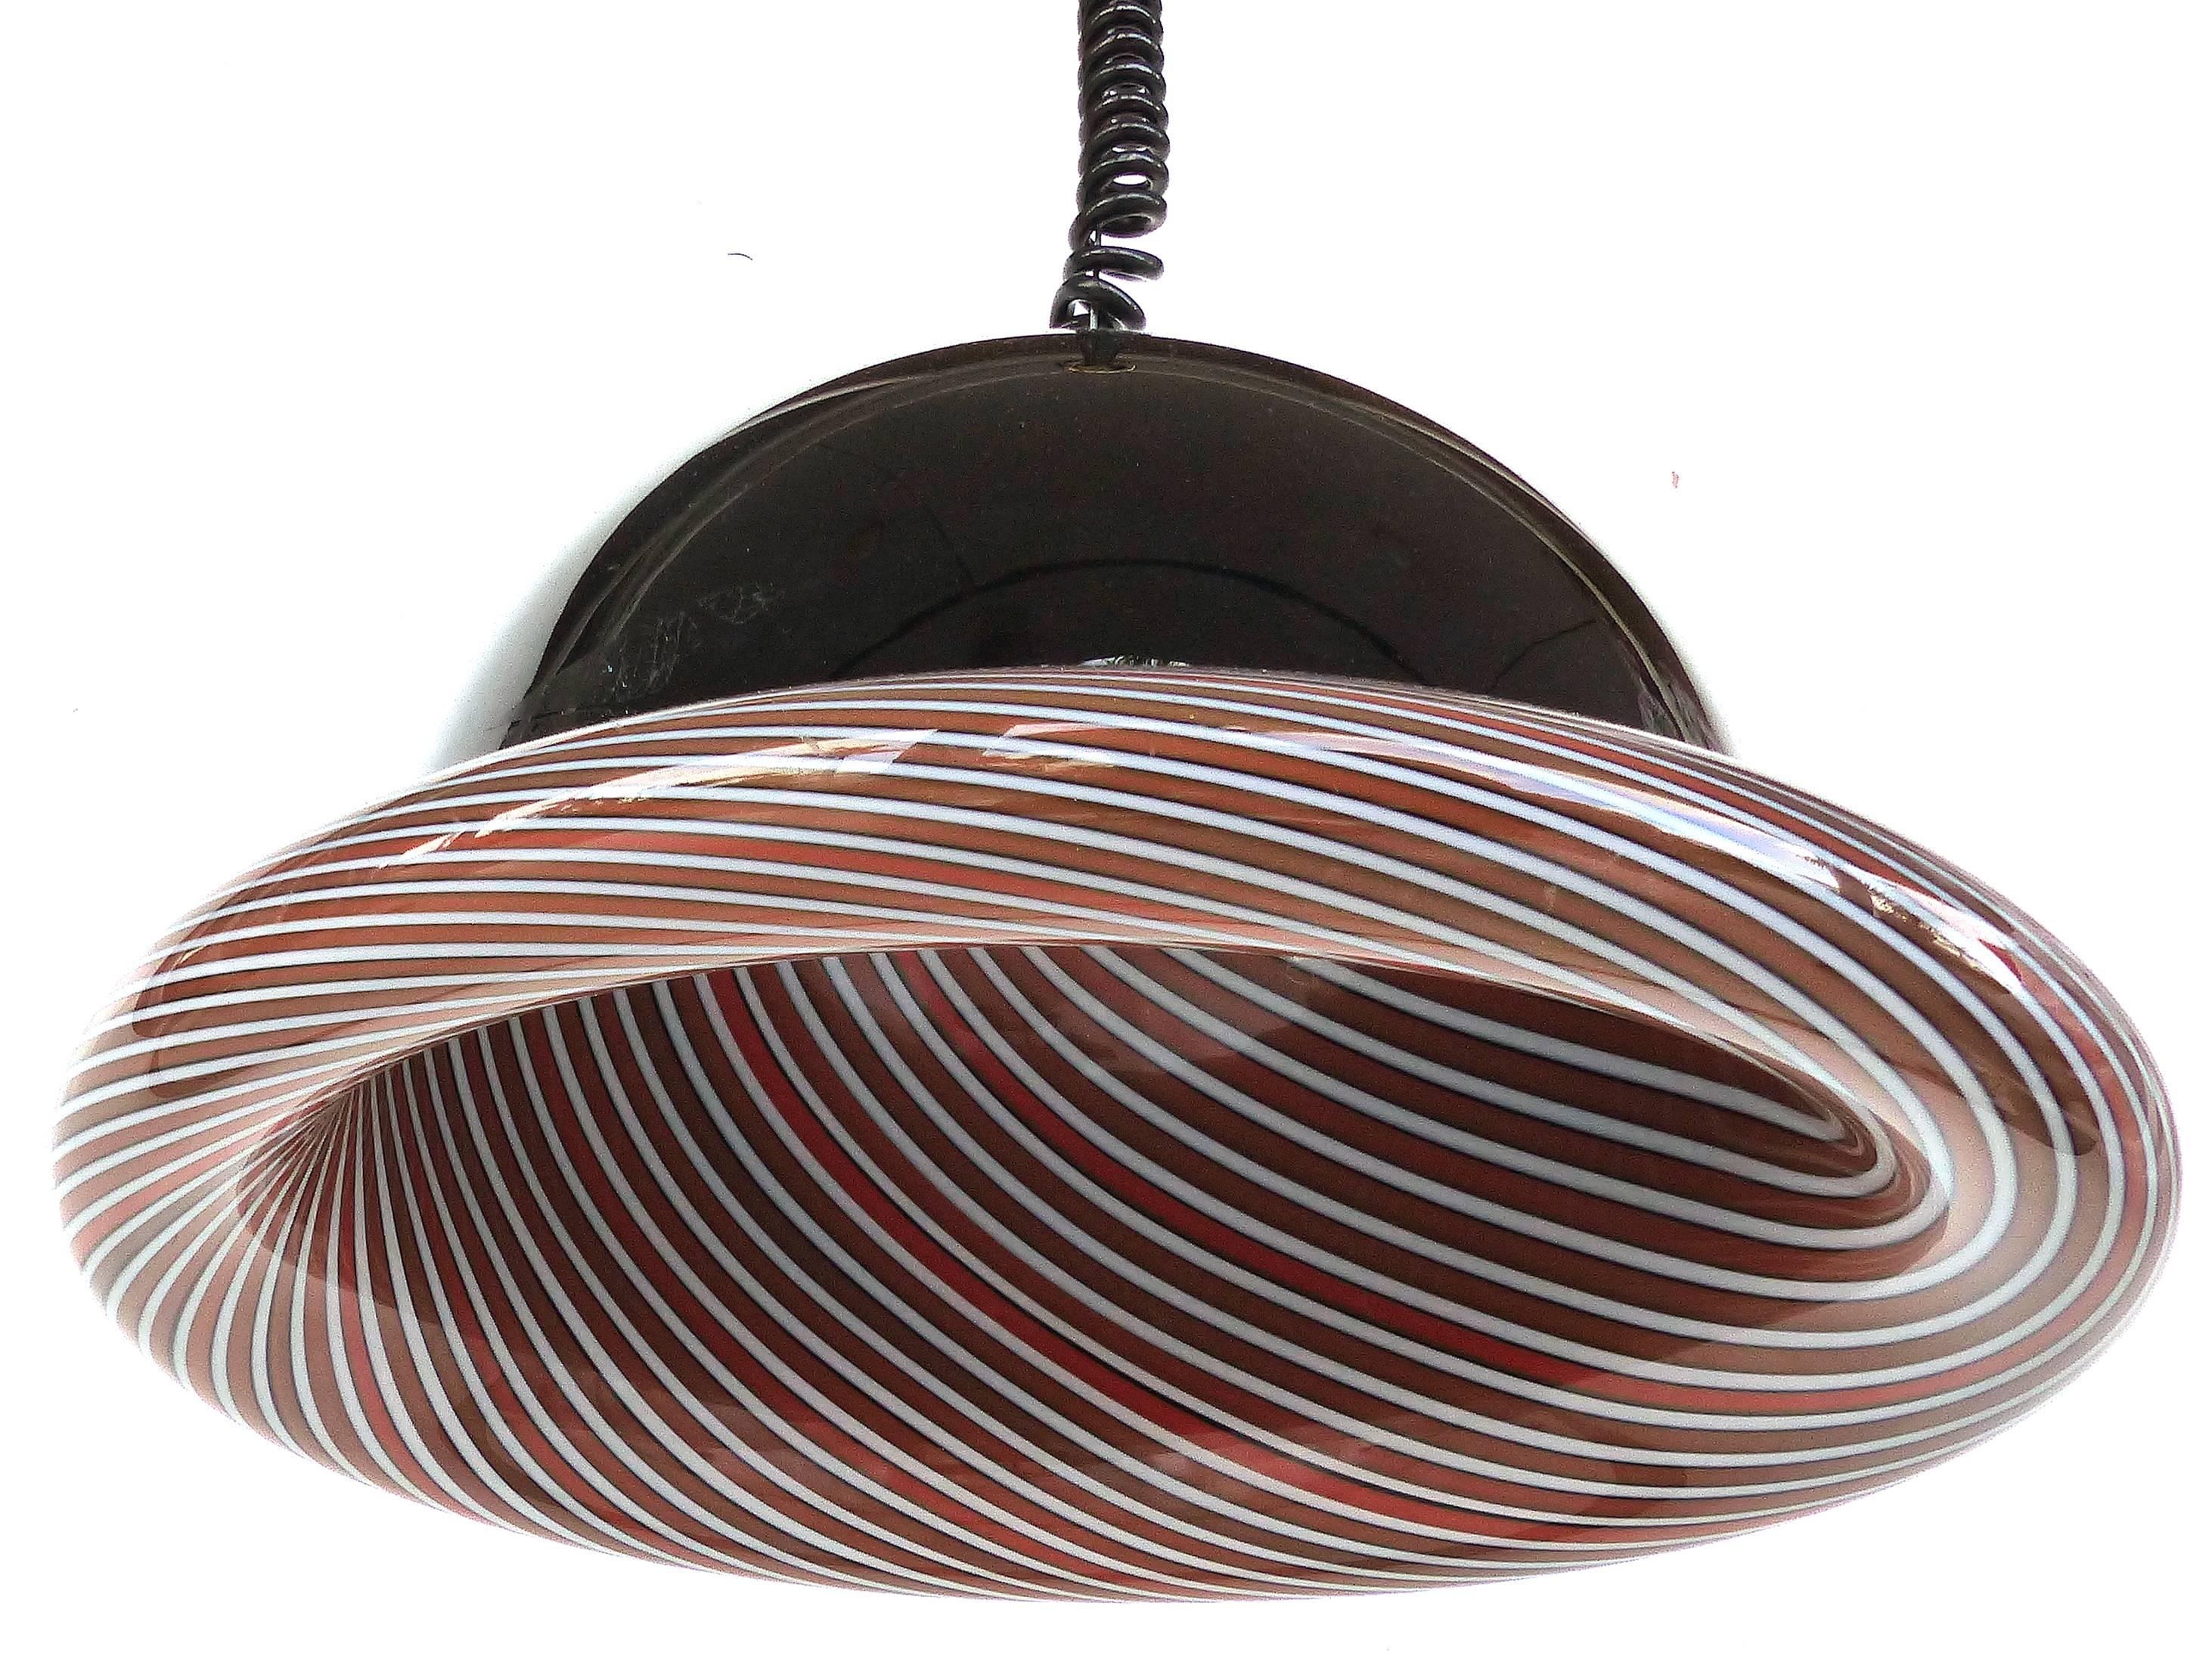 1980s Effetre, Vincenzo Muretti Murano Glass Pendant Light Fixture

Offered is a Postmodern Italian Murano glass pendant chandelier. Wired and in working condition. Supported from a wire with a coiled black cord which can be adjusted in length from